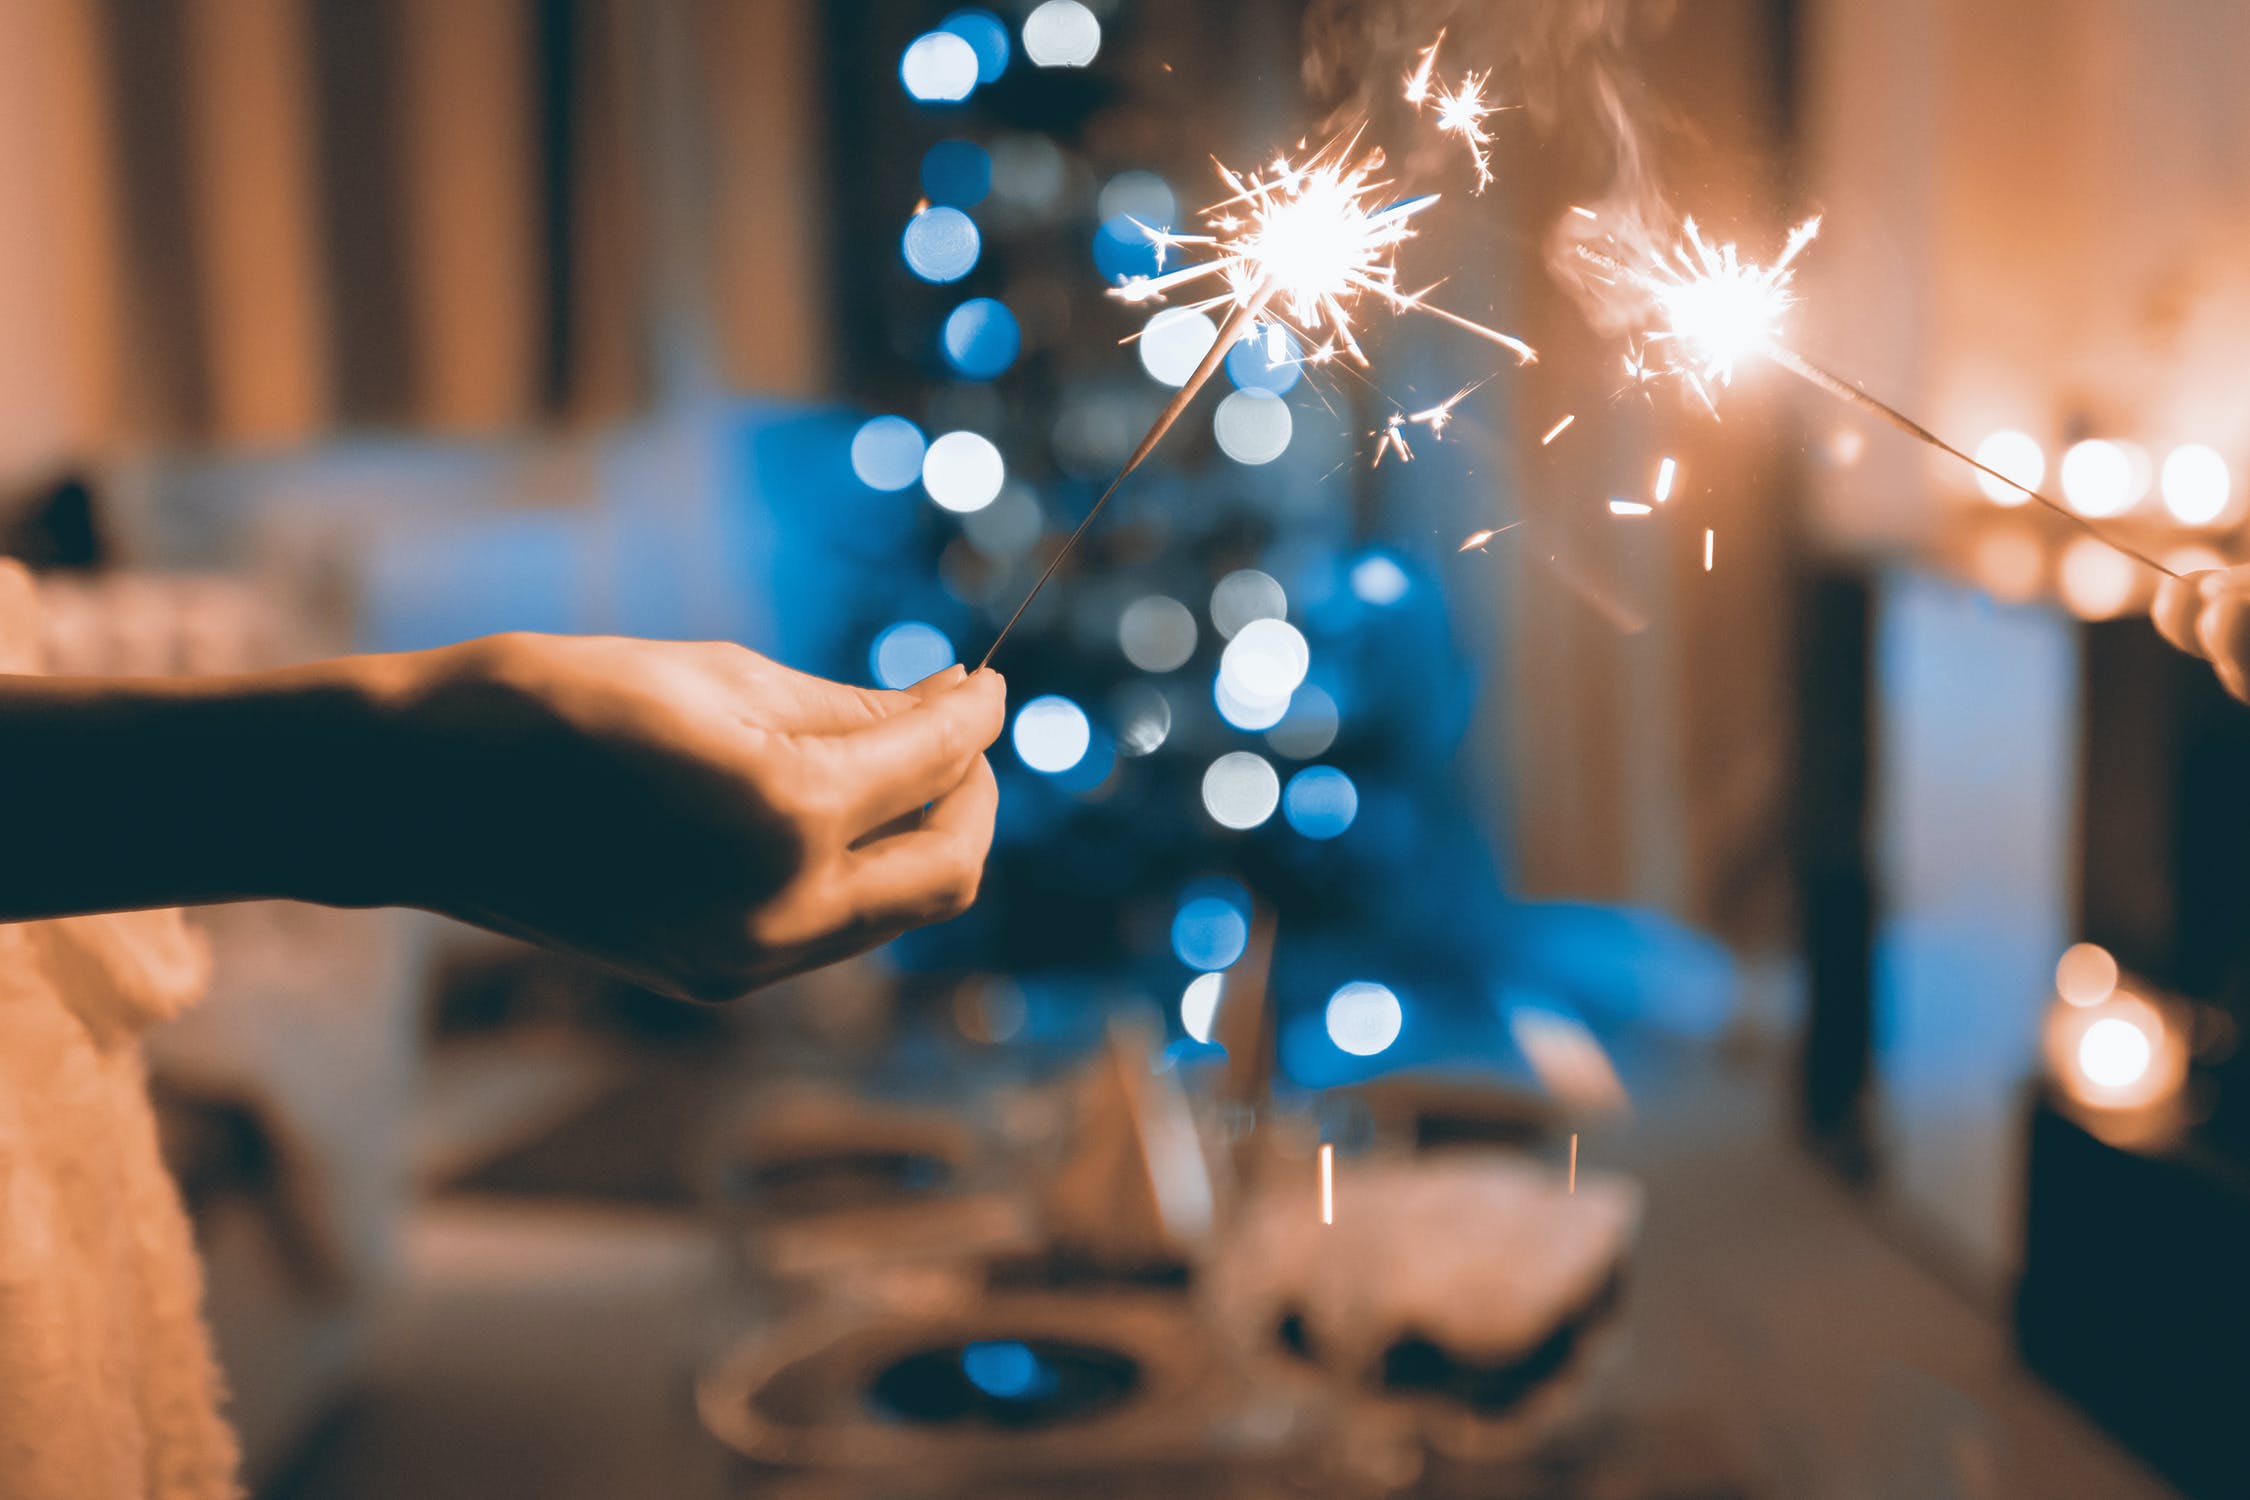 Tips & Tricks Tuesday: Embrace the 2020-ness of the Holidays